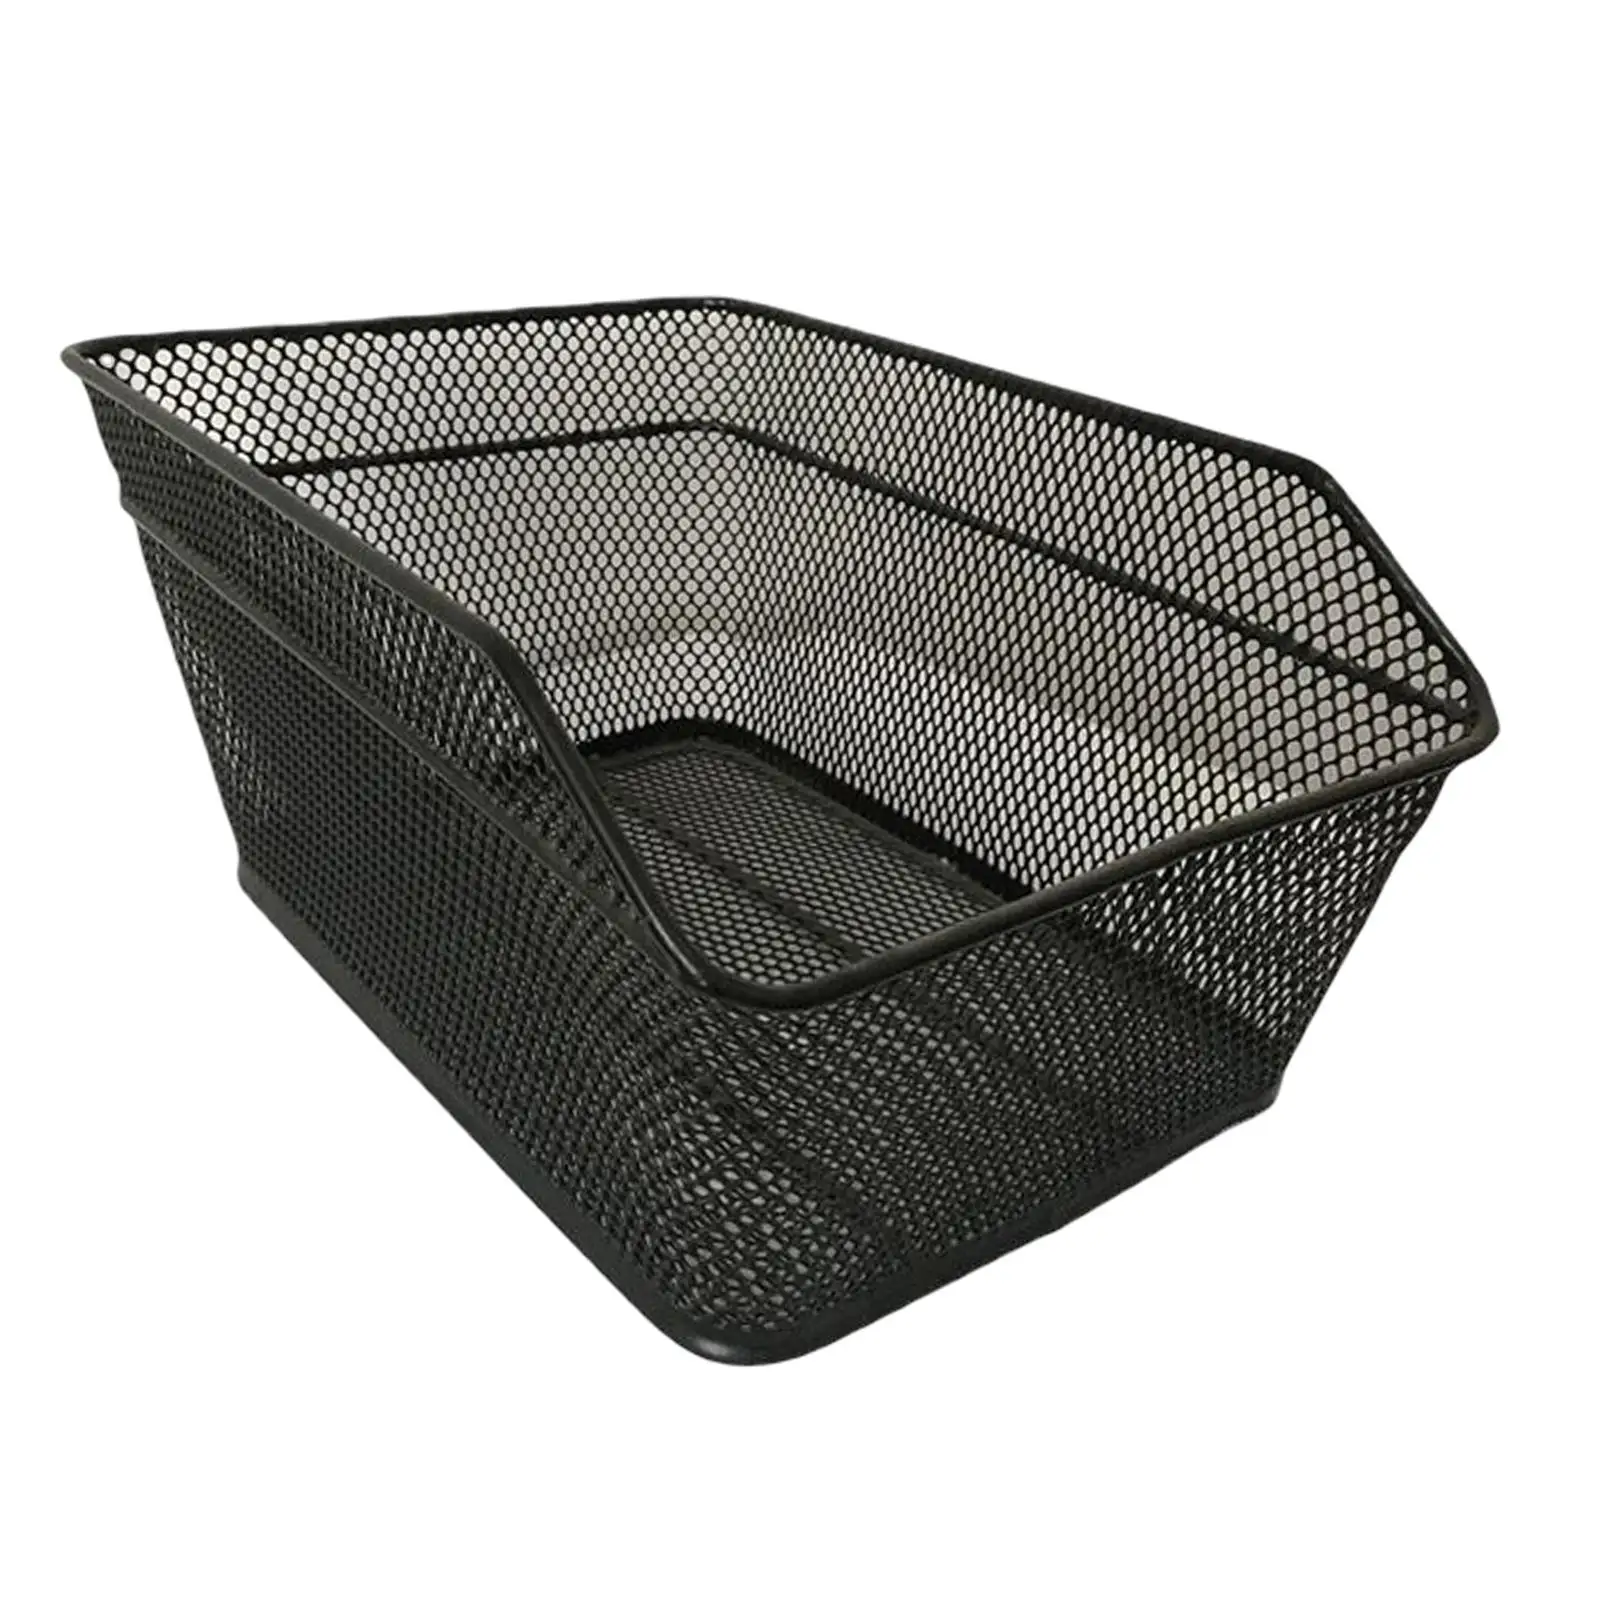 Universal Rear Bike Basket Parts Wear Resistant Detchable Sundries Container Rustproof Luggage Rack for Cargo Storage Outdoor